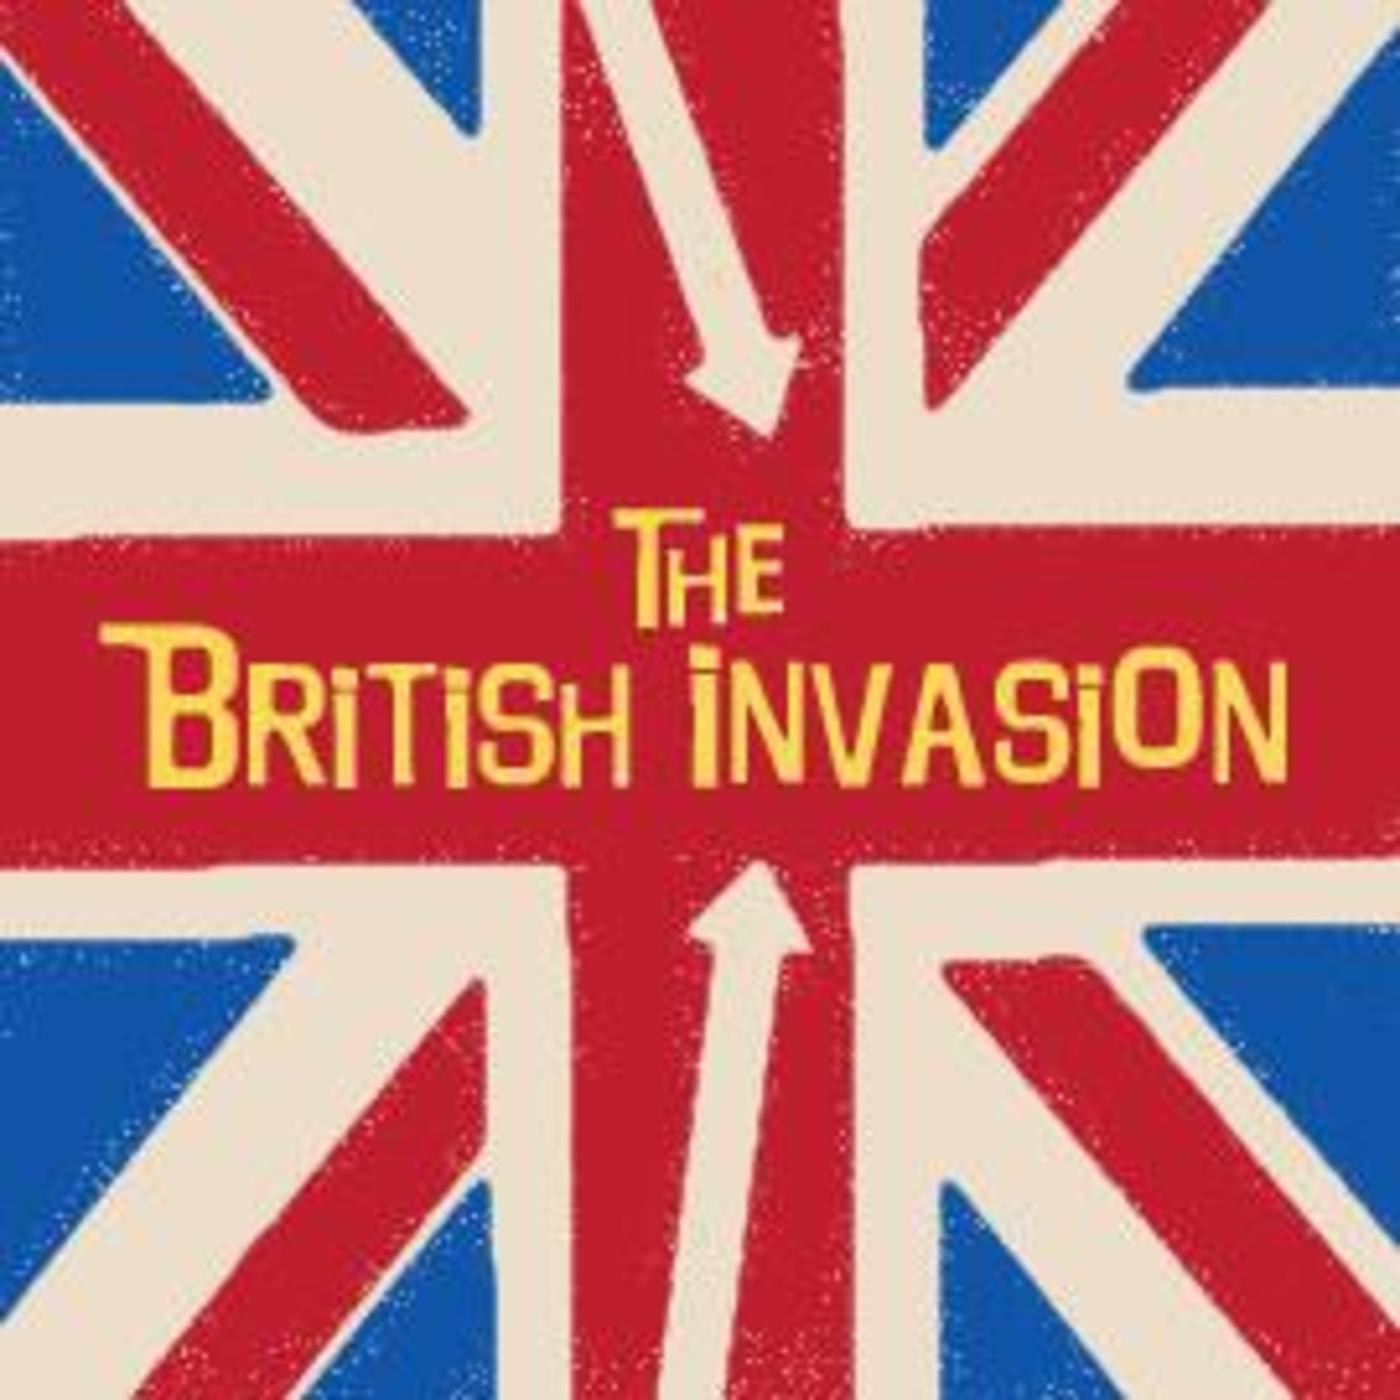 British Invasion - Billy J. Kramer & The Dakotas, Herman's Hermits, The Rolling Stones, The Searchers, The Honeycombs, Adam Faith, The Swinging Blue Jeans, The Ivy League, The Fourmost